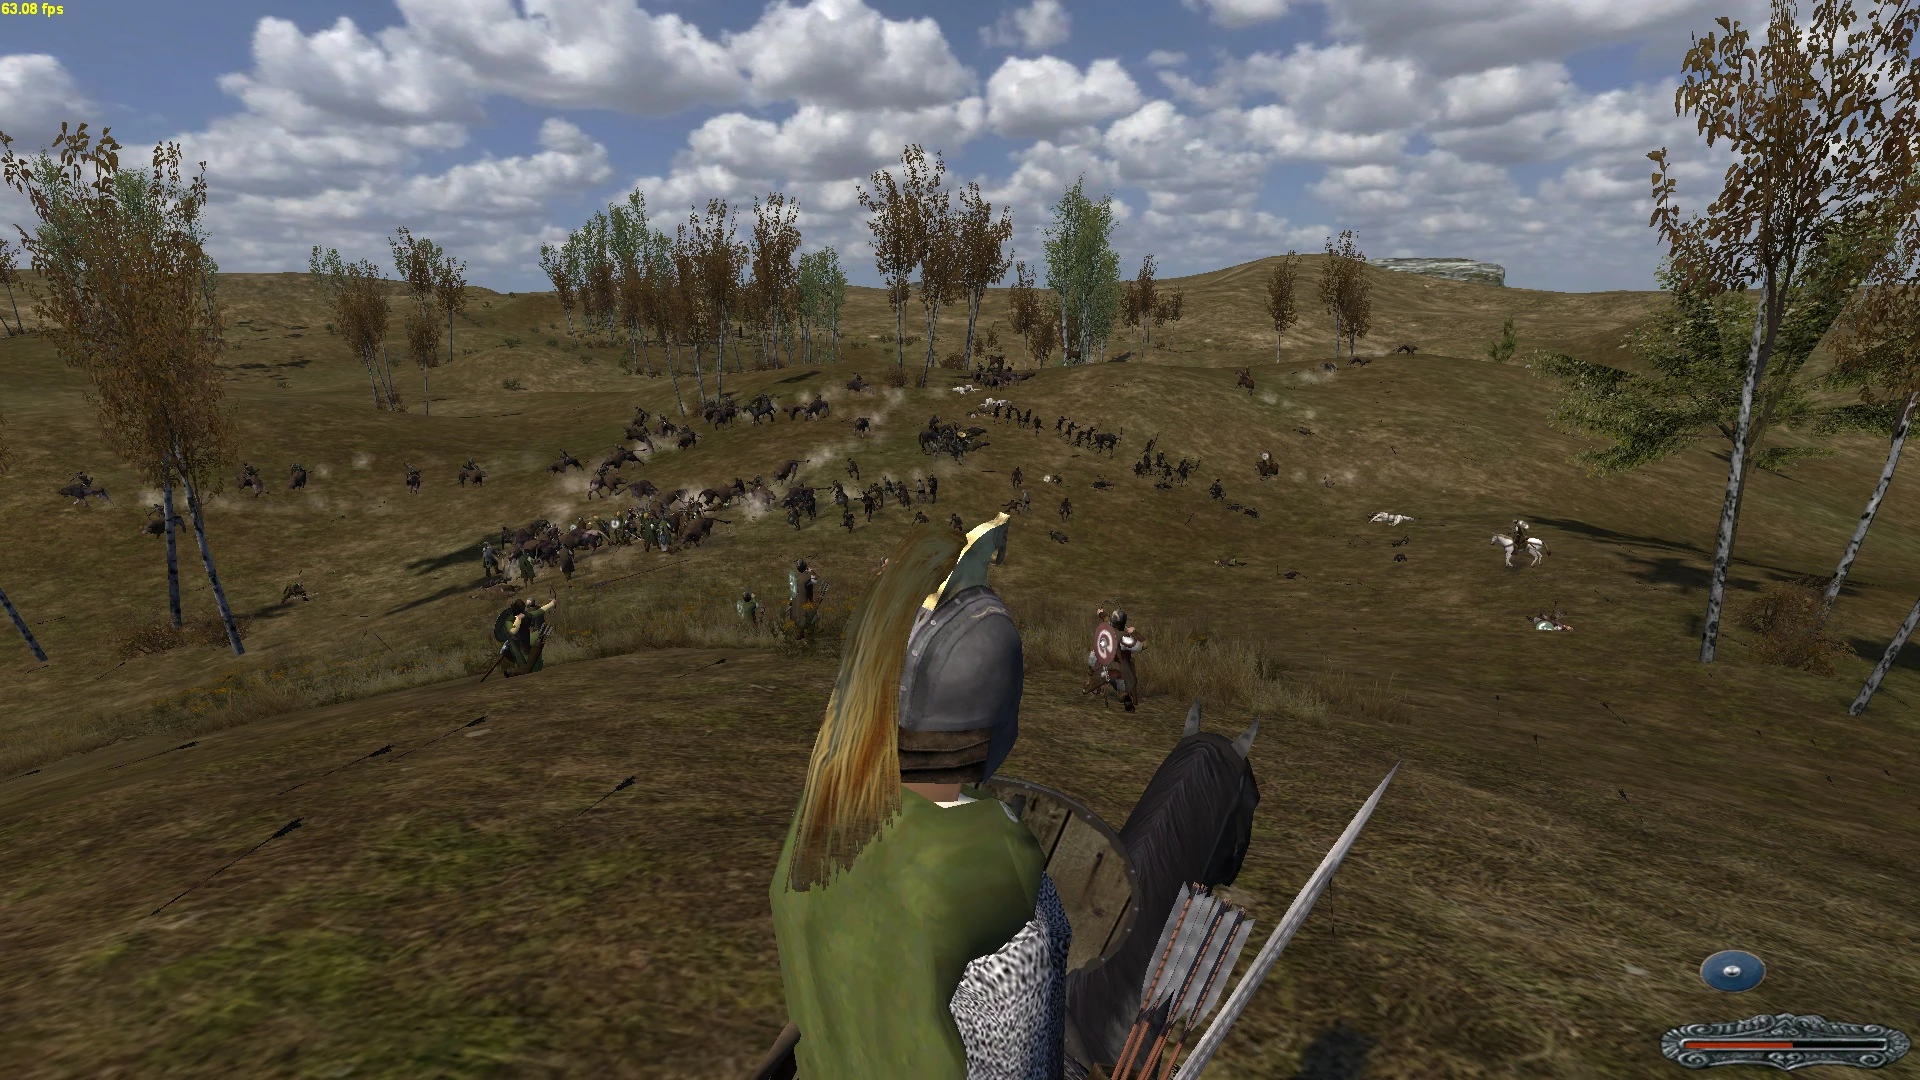 Last days warband. Mount Blade last Days юниты Лотлориэн. Mount and Blade the last Days. Mount and Blade Warband the last Days. Mount and Blade Warband the last Days of the third age.